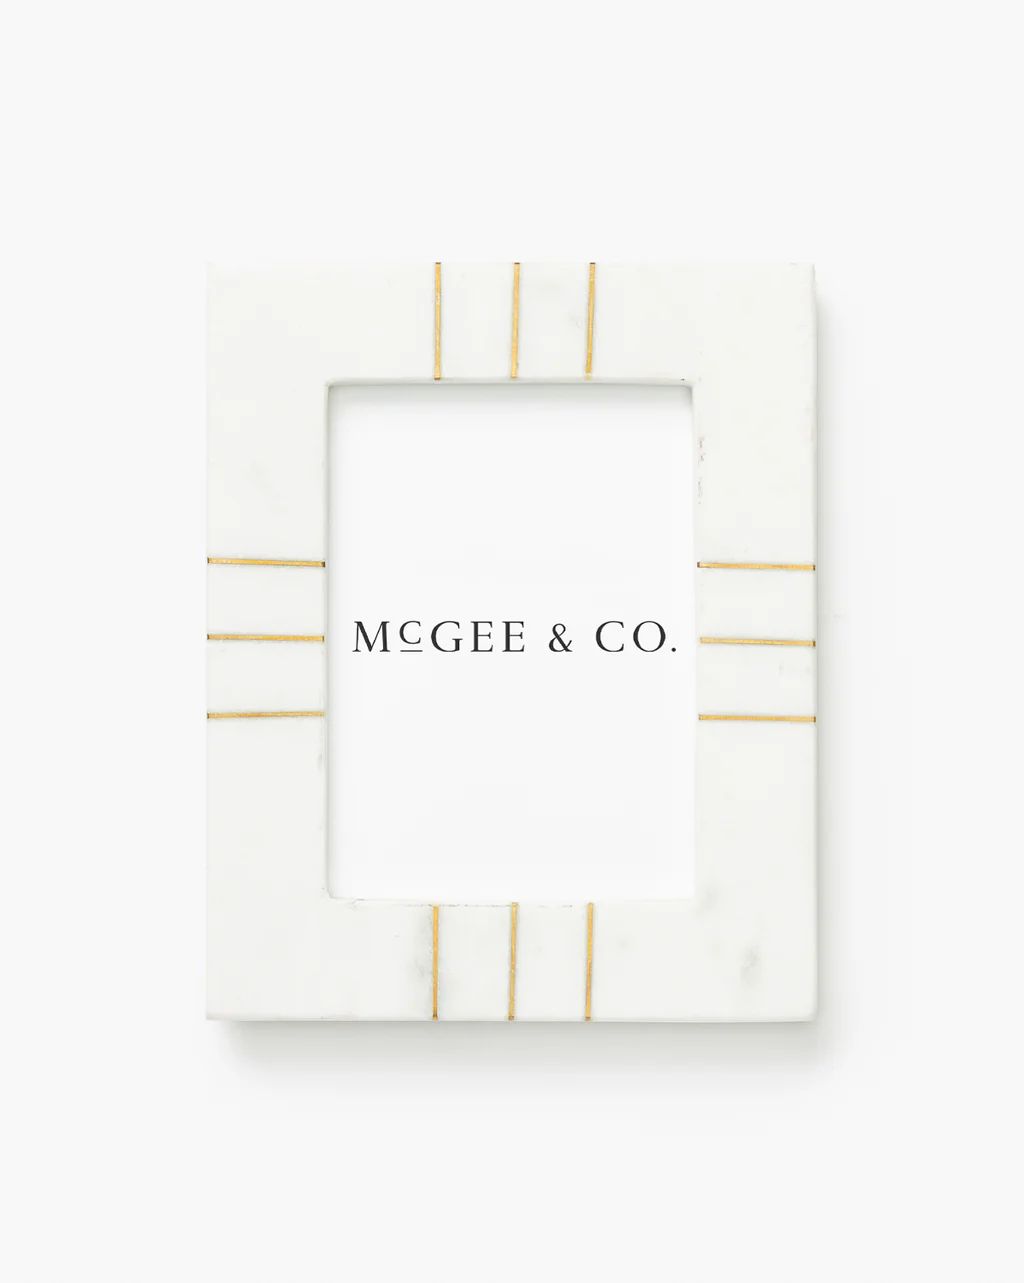 Marble & Brass Frame | McGee & Co.